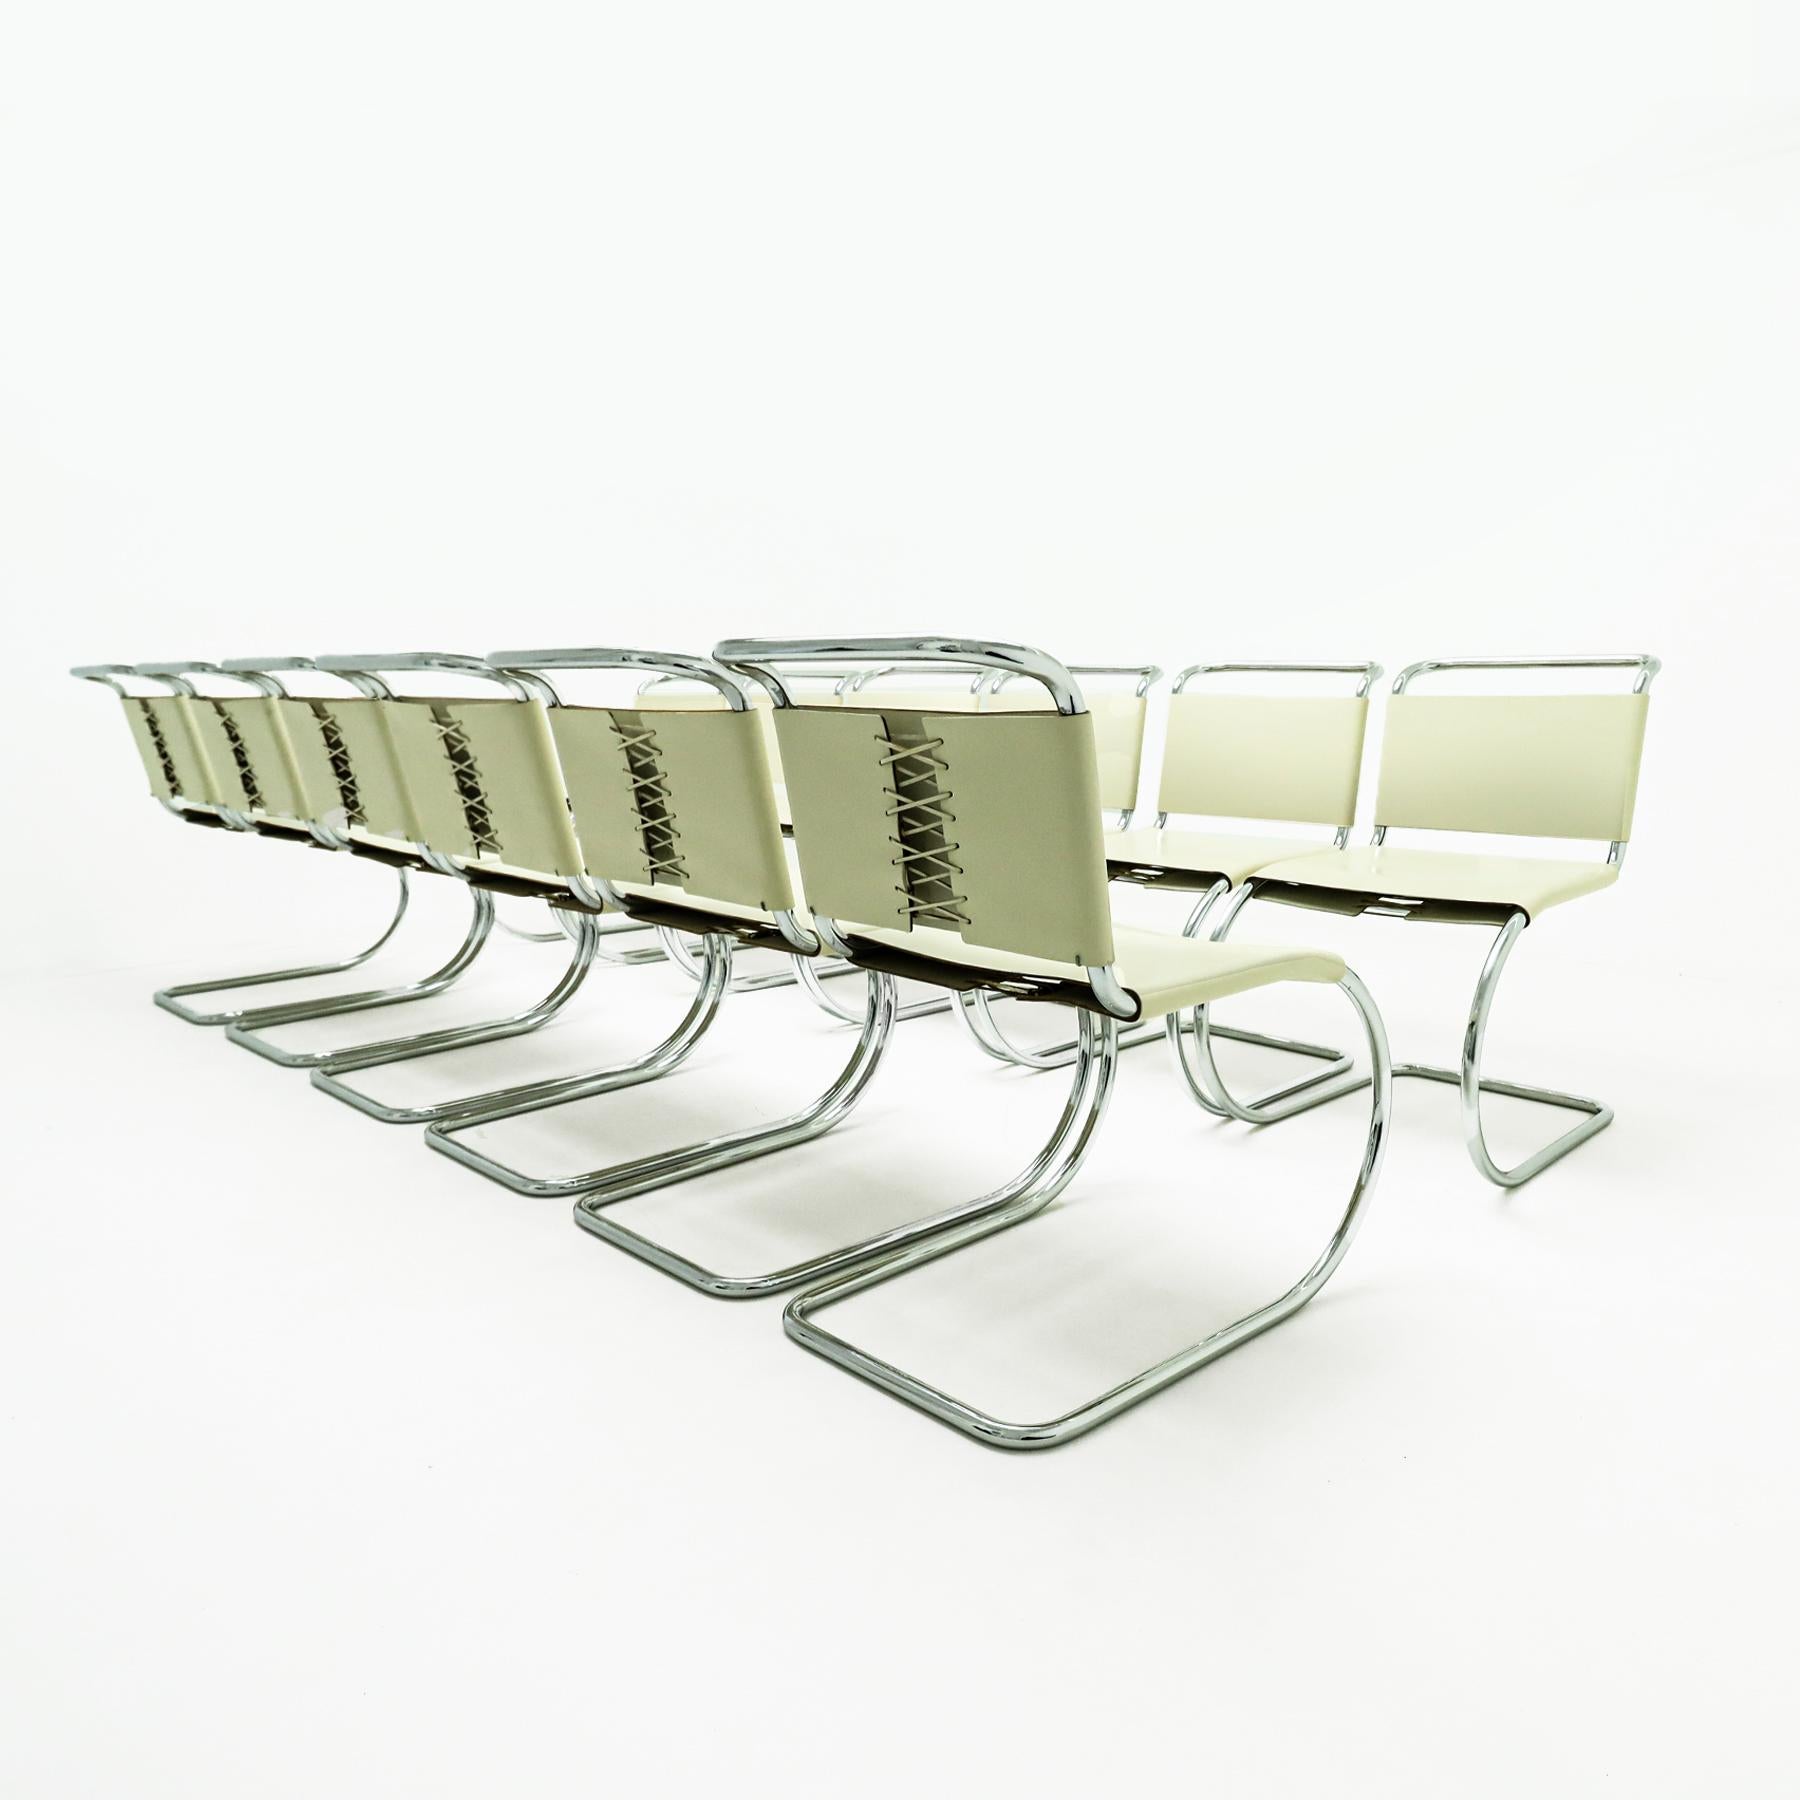 Steel 12 Mies van der Rohe Bauhaus MR10 cream leather dining chairs by Knoll 